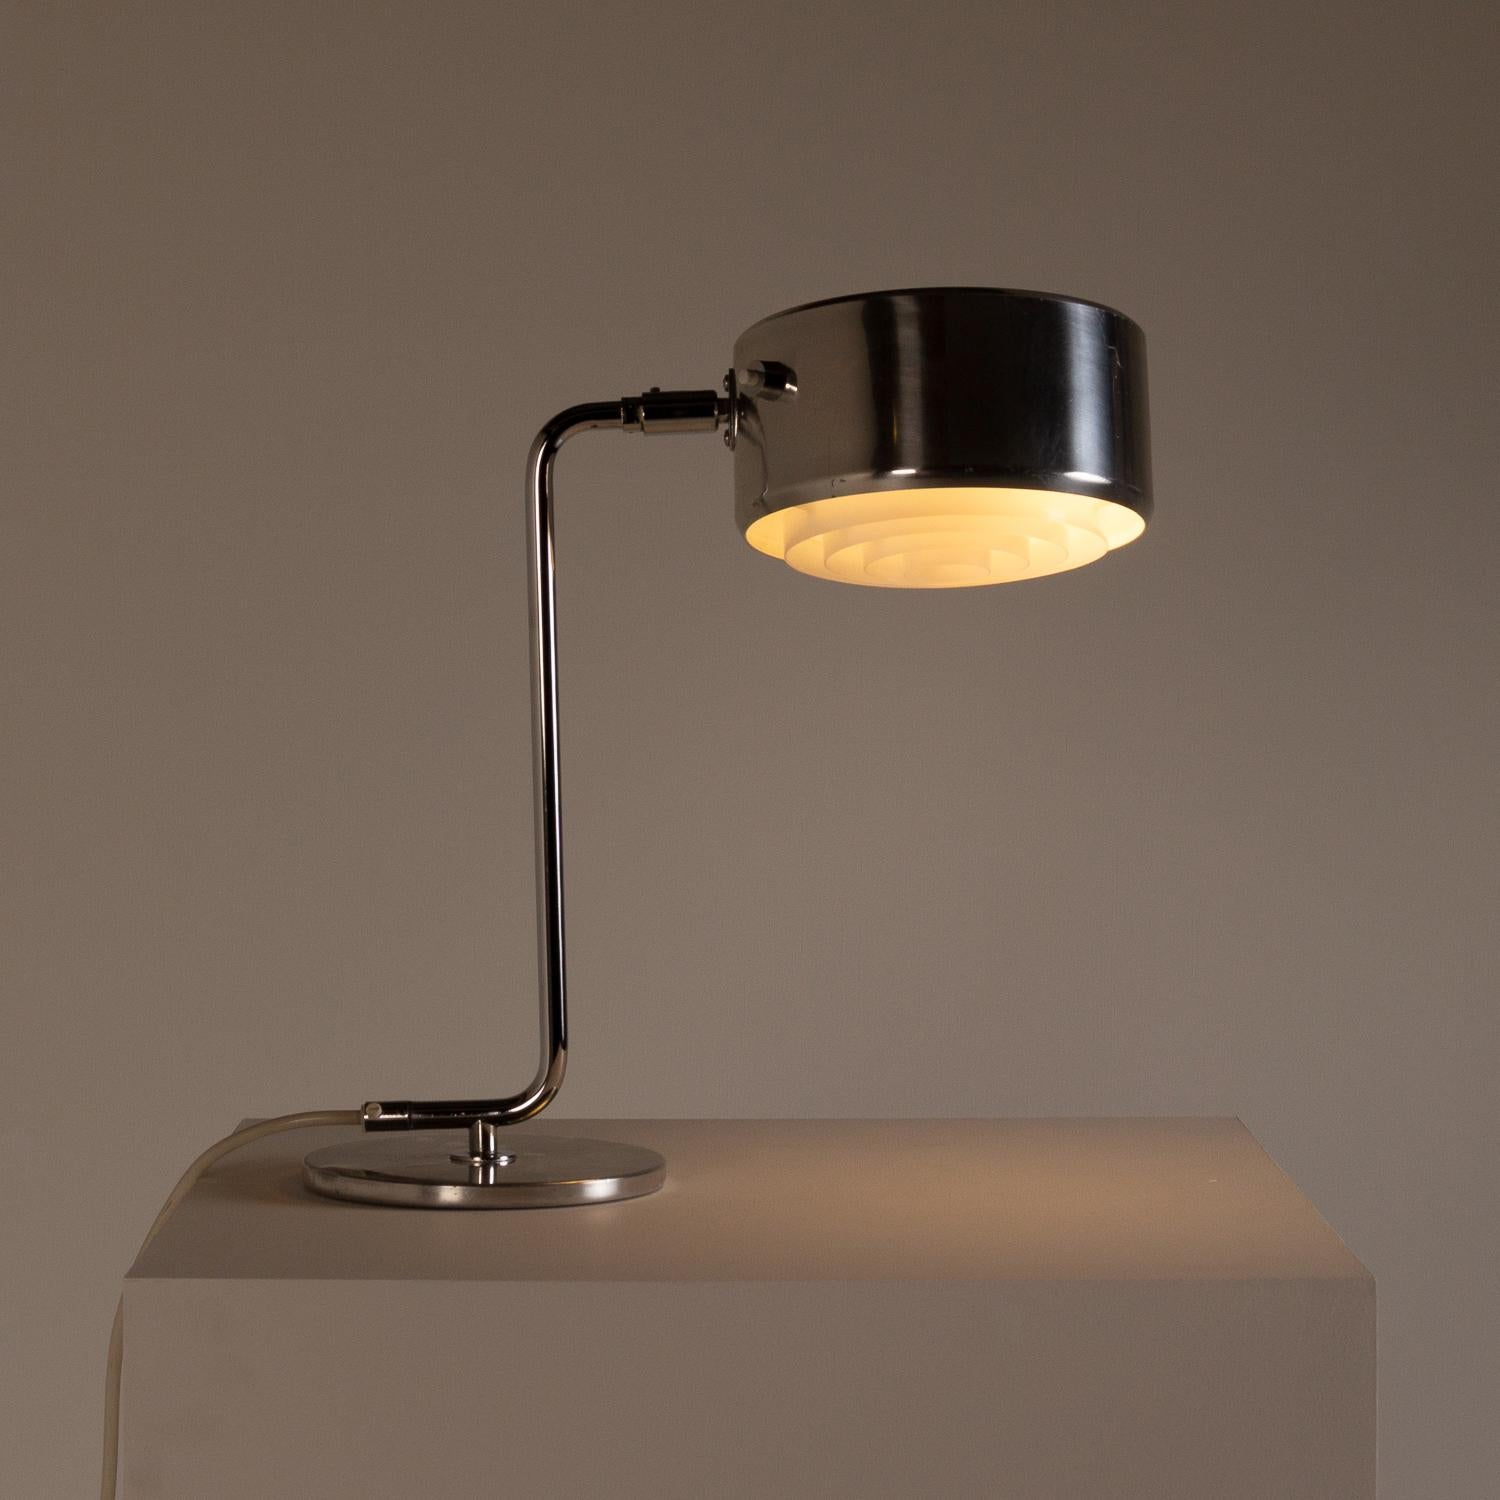 An aluminium Simris or Olympia desk light by Anders Pehrson for Ateljé Lyktan, Åhus, Sweden, 1970s. The light has two light bulbs which can be illuminated individually or together. The Simris or Olympia light was used in the participants’